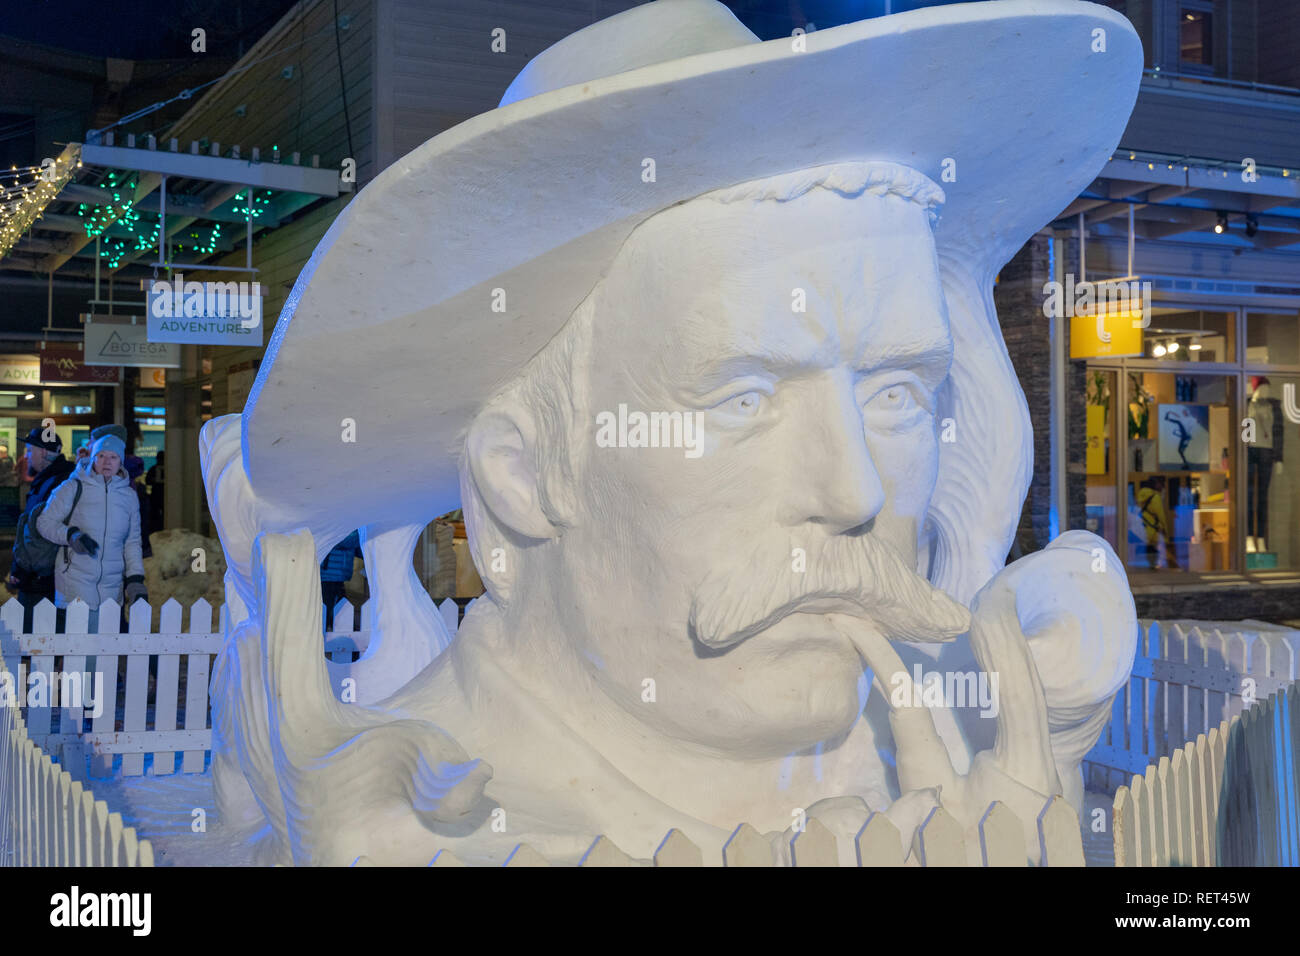 Banff, Alberta Canada - Jan 19, 2019: Snow sculpture of WIld Bill Peyto in Banff Avenue Square during Banff Lake Louise Snow Days 2019 in winter Stock Photo